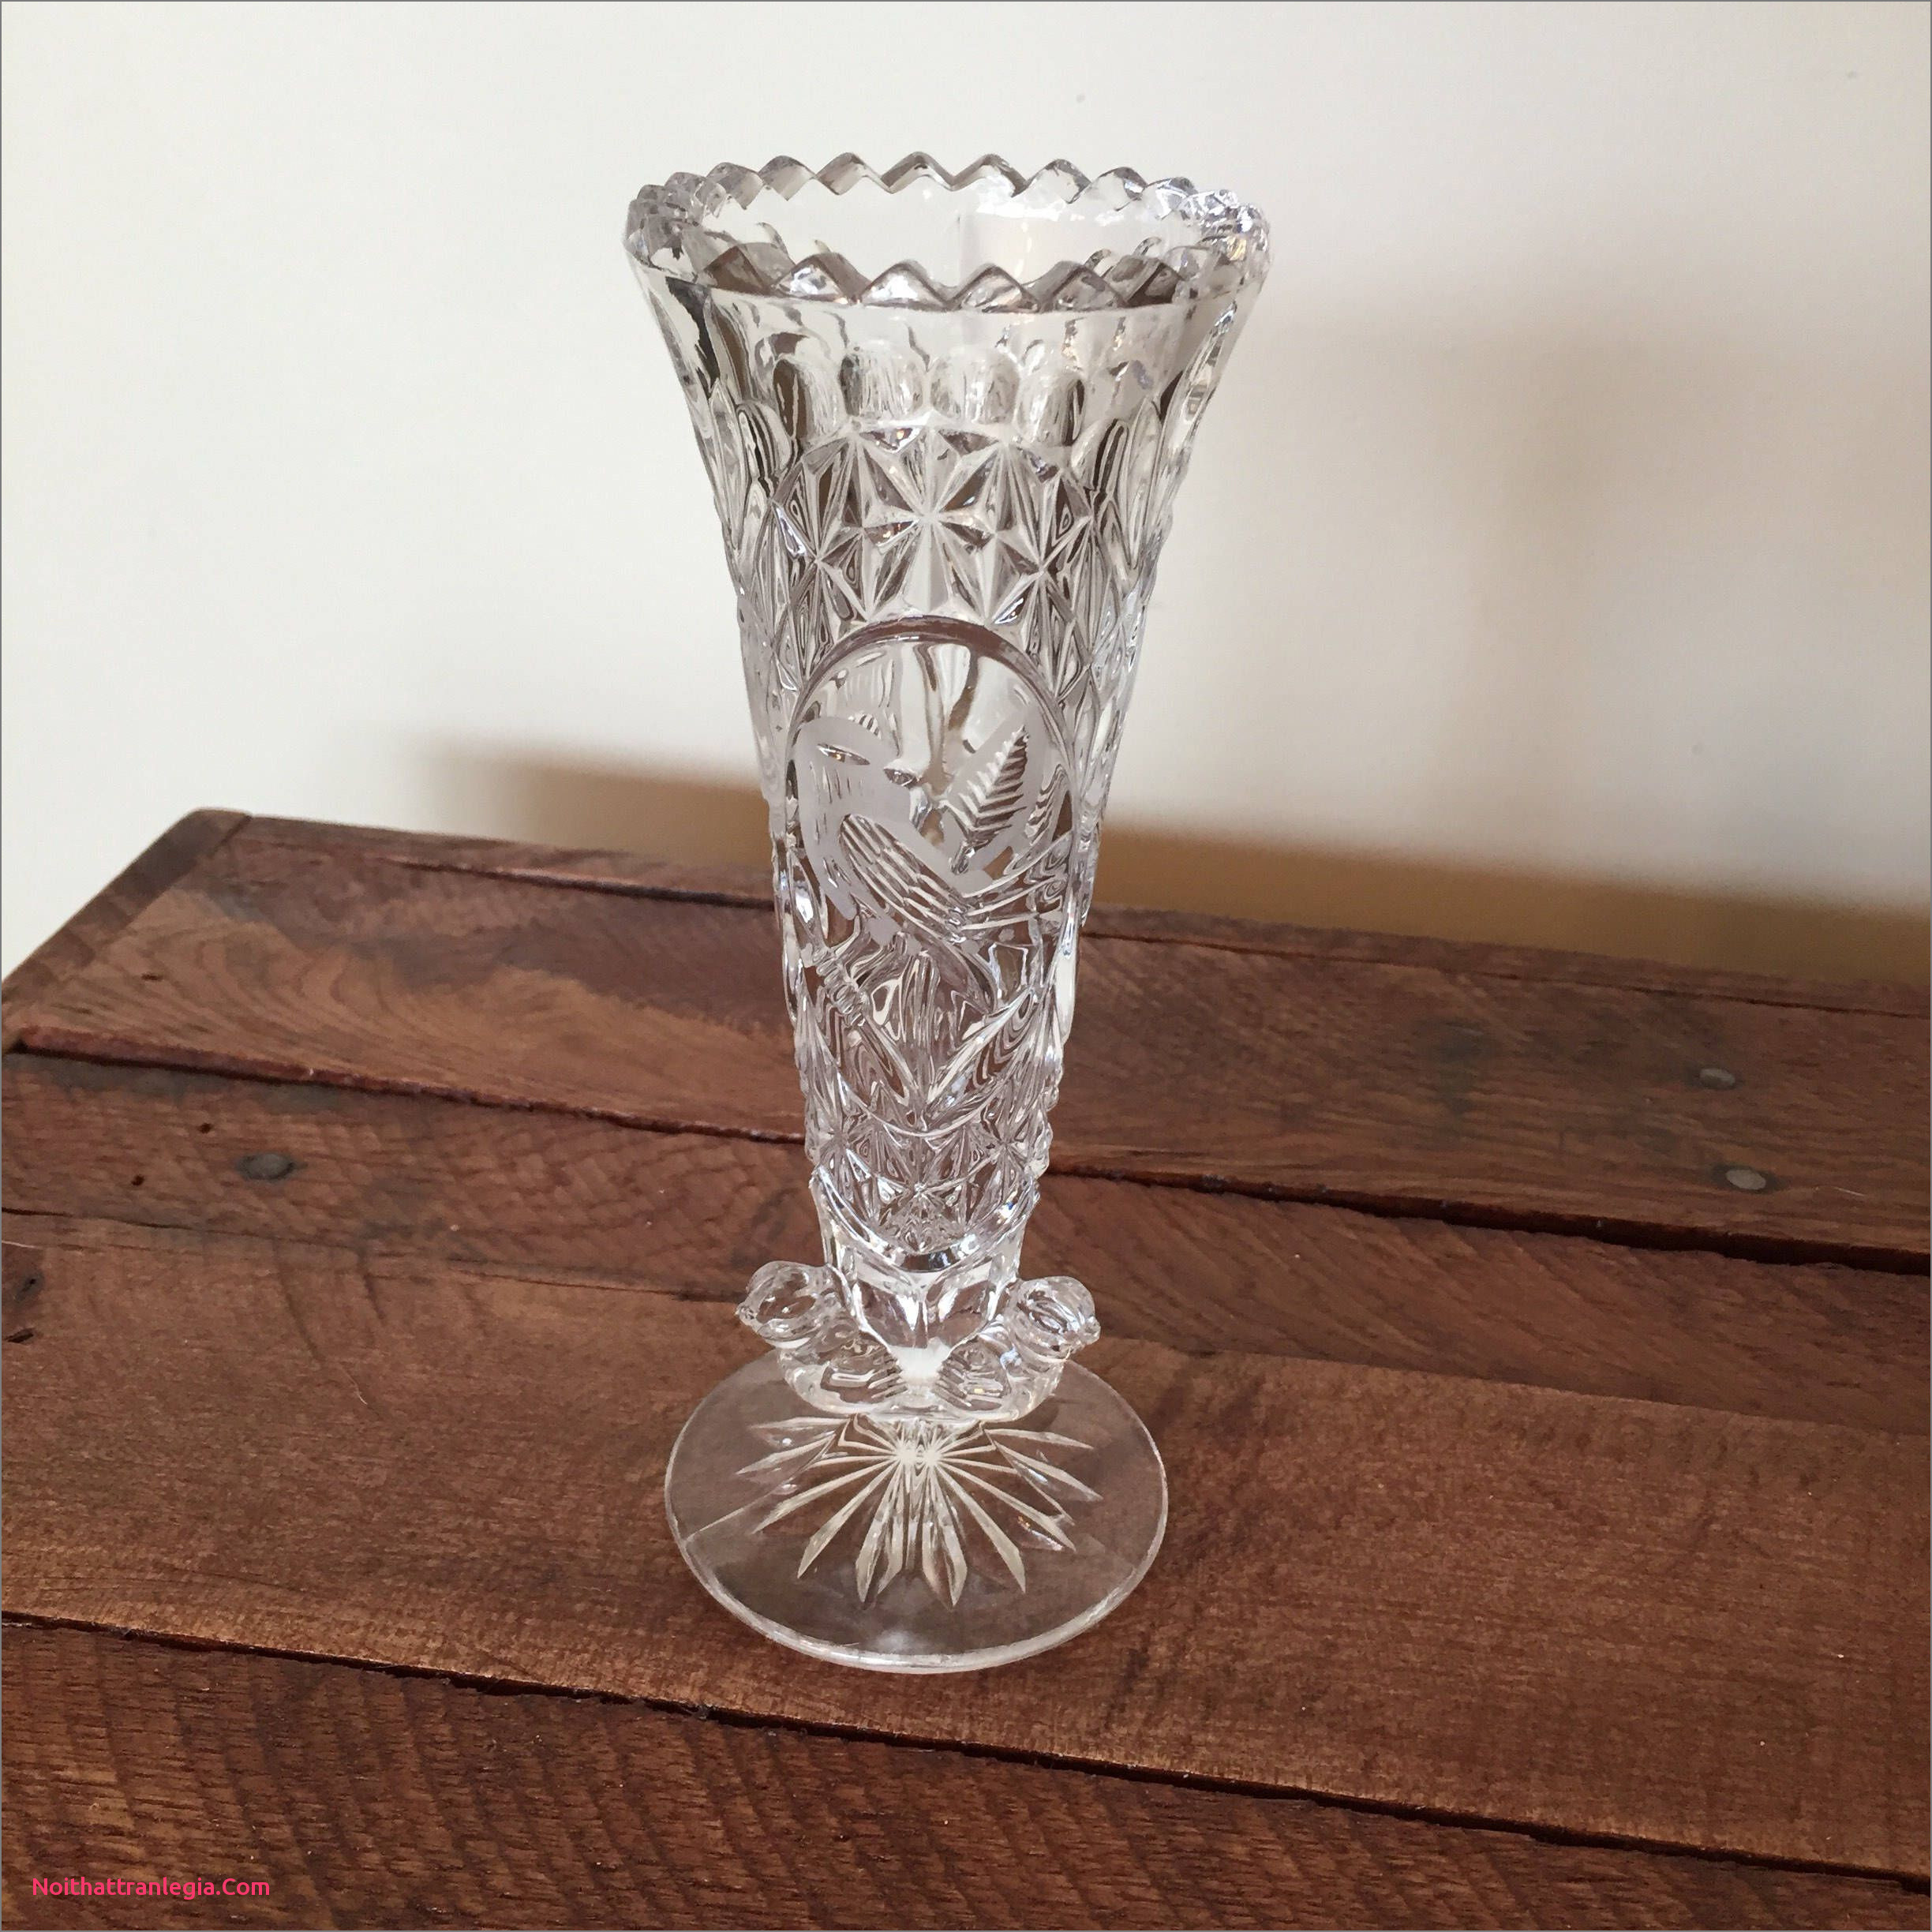 26 Great Antique Small Chinese Vases 2022 free download antique small chinese vases of 20 cut glass antique vase noithattranlegia vases design pertaining to vintage cut glass bird vase etched glass vase three glass birds perched on vase crystal b